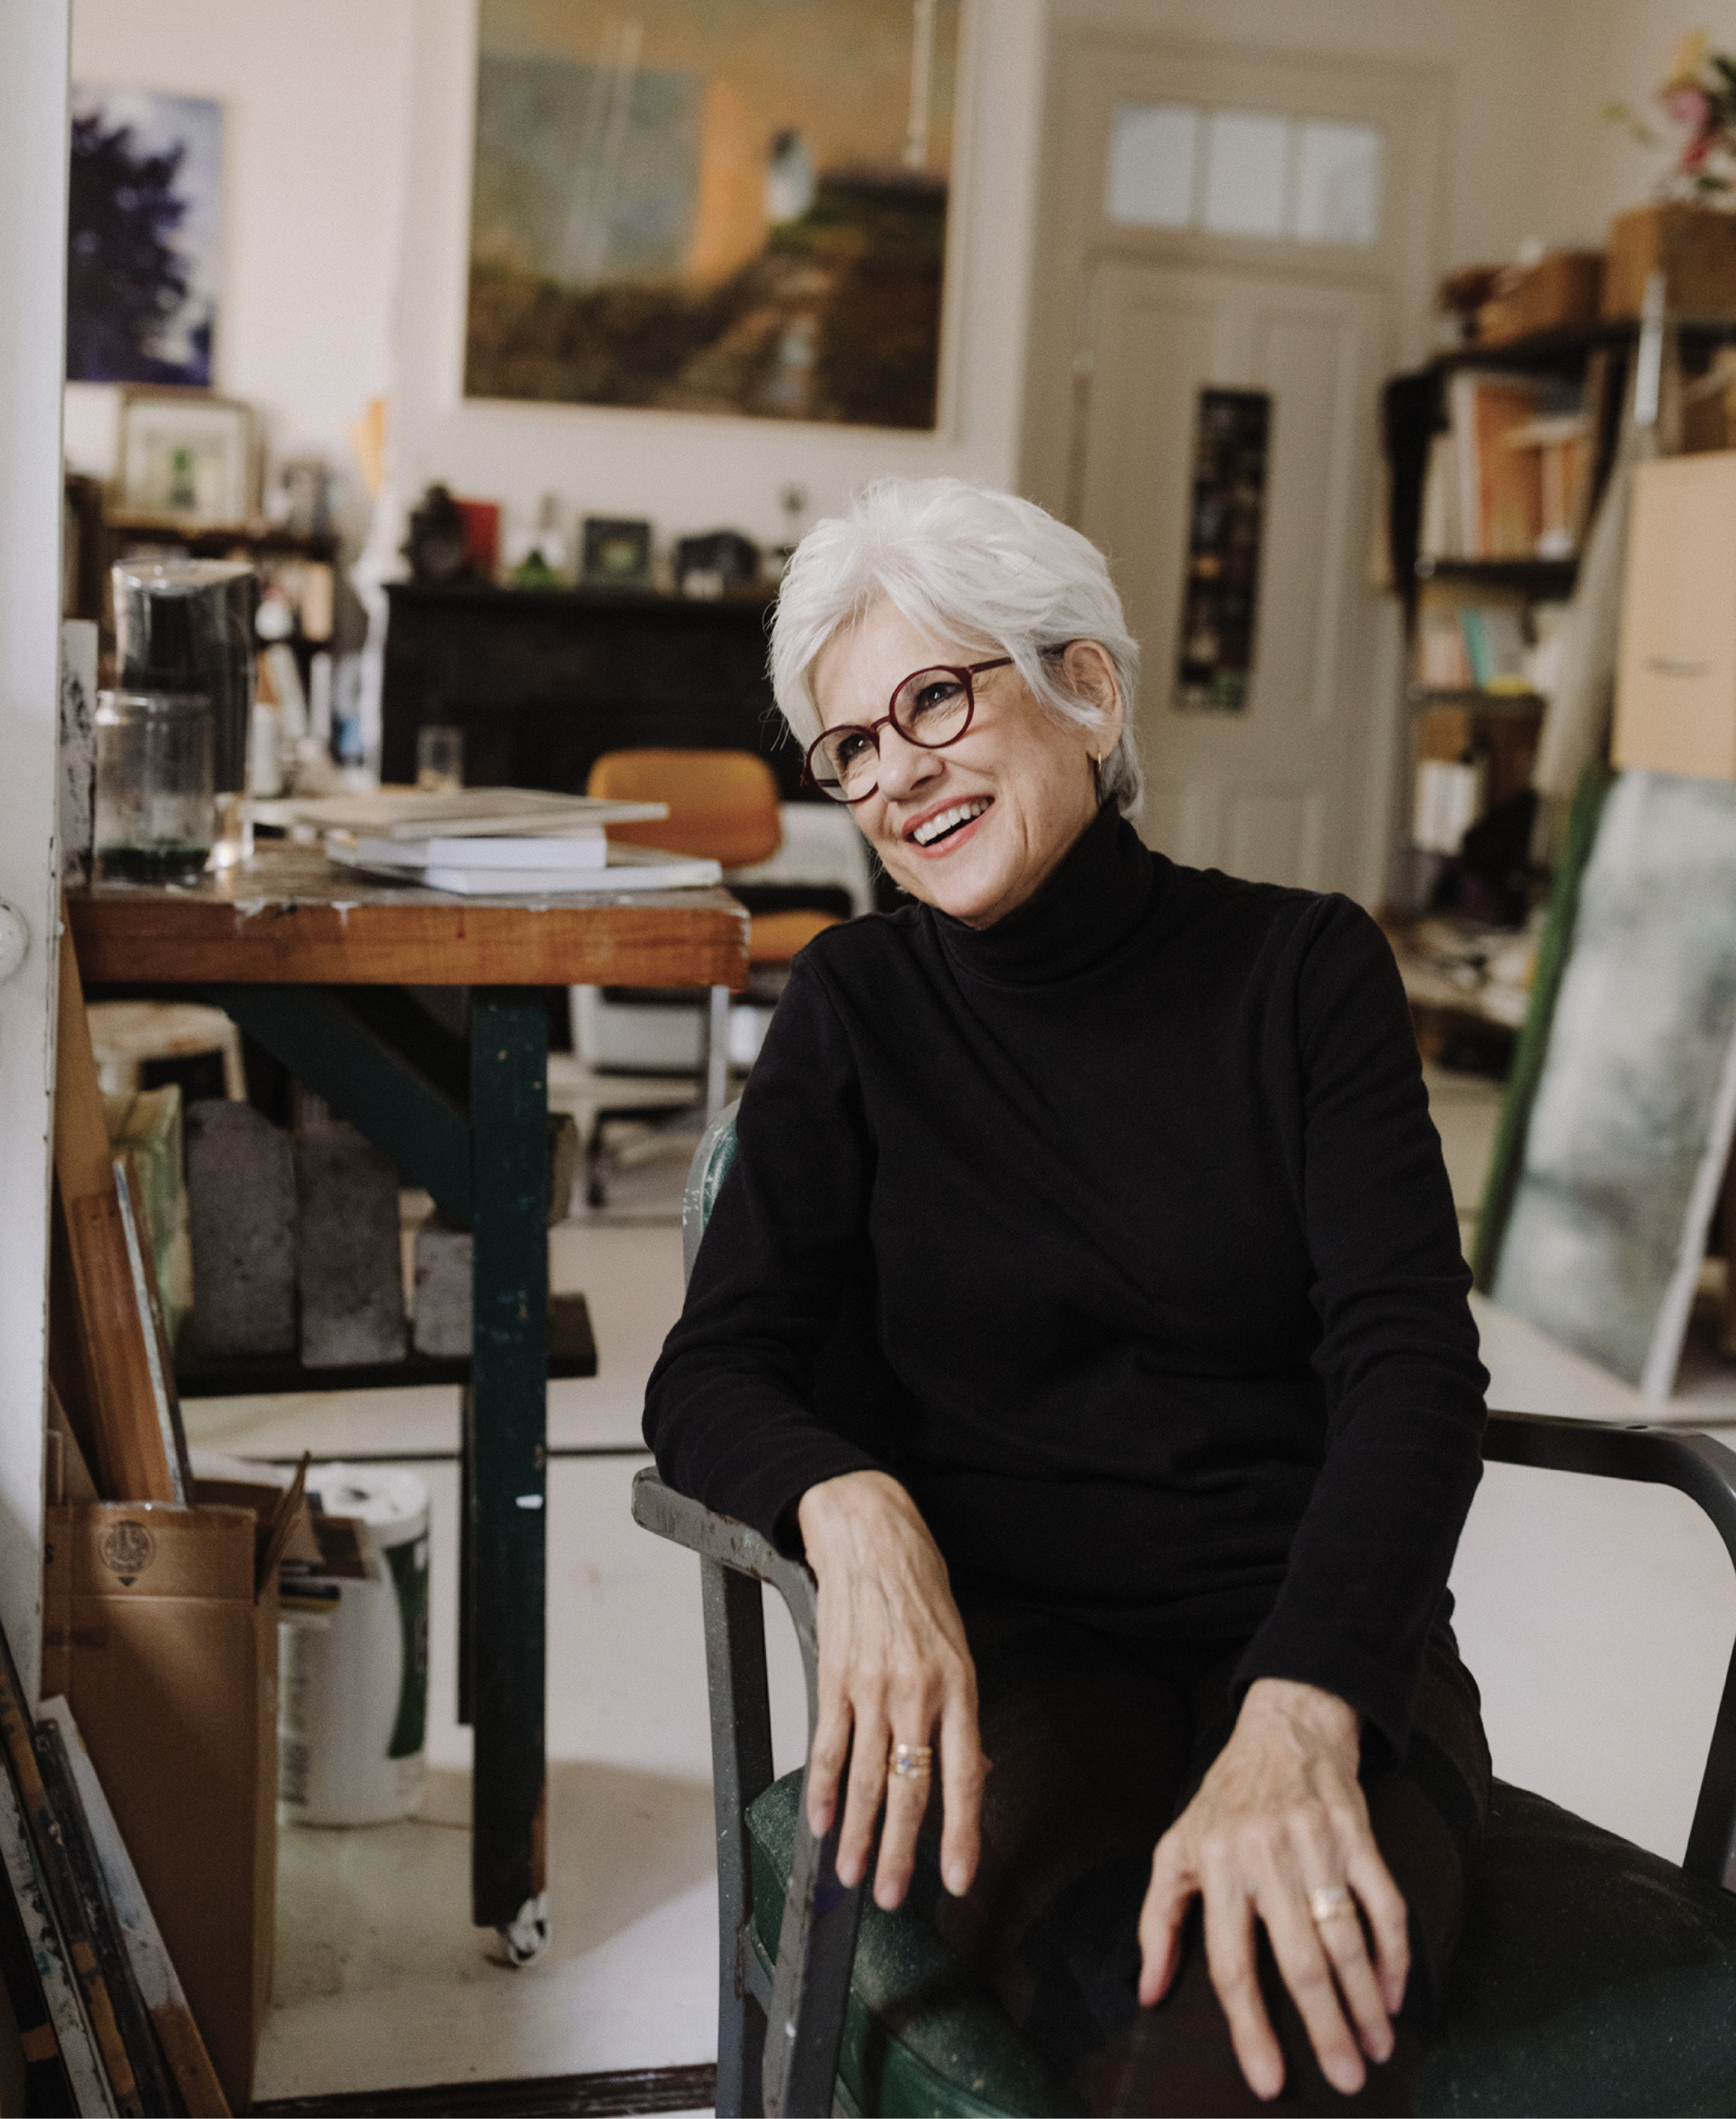 Fresh Vision: While Linda Fantuzzo has been a mainstay of the Charleston art community for decades, she continues to push boundaries. Pictured here in her Bull Street studio, she takes a break from finishing a new work for her upcoming City Gallery exhibit.